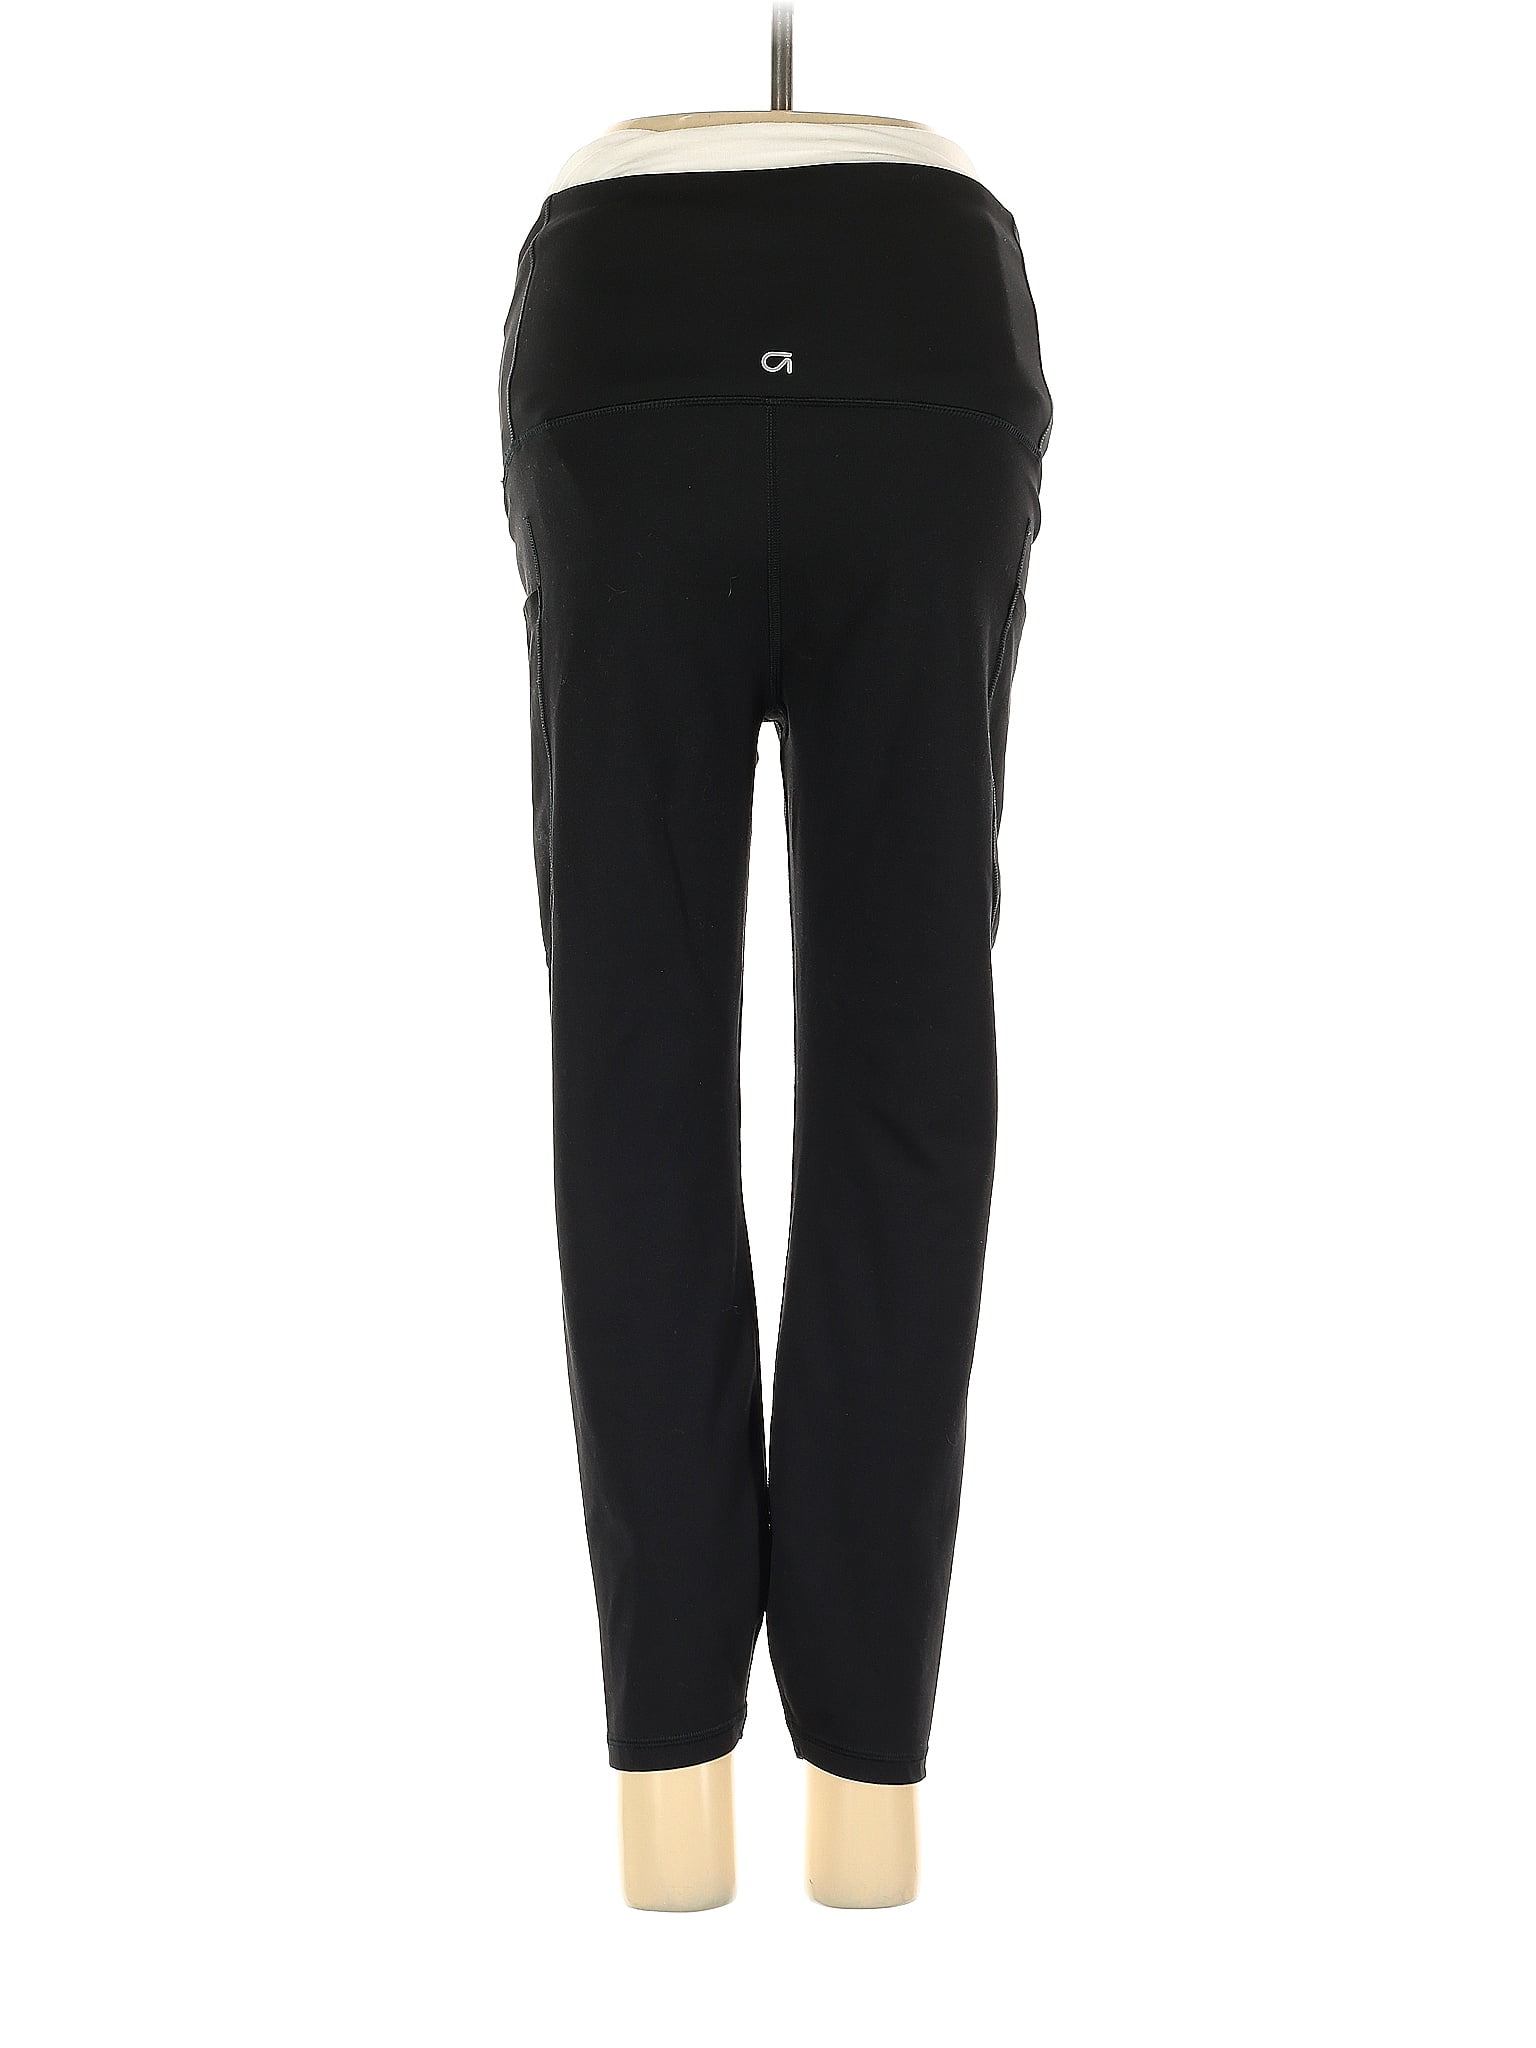 Gap Fit Solid Black Active Pants Size S (Maternity) - 62% off